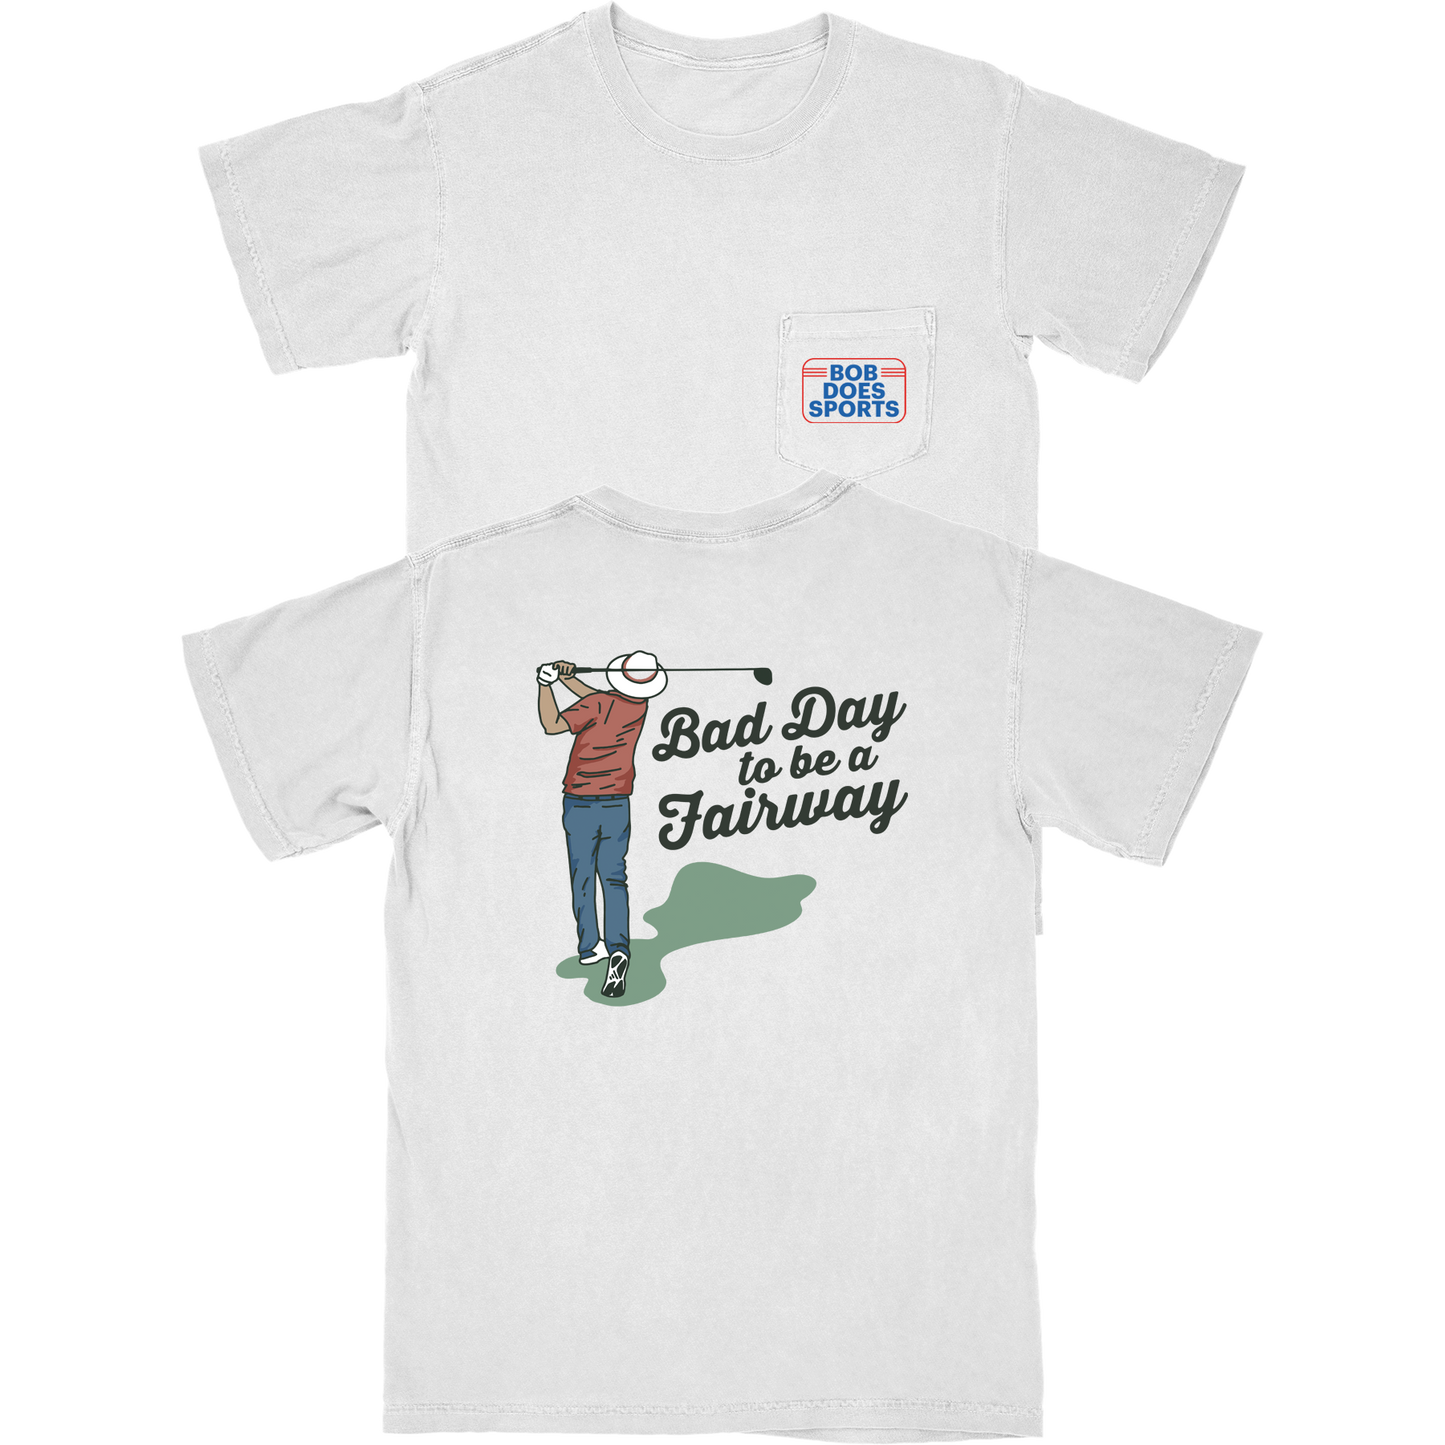 Bad Day to Be a Fairway T Shirt